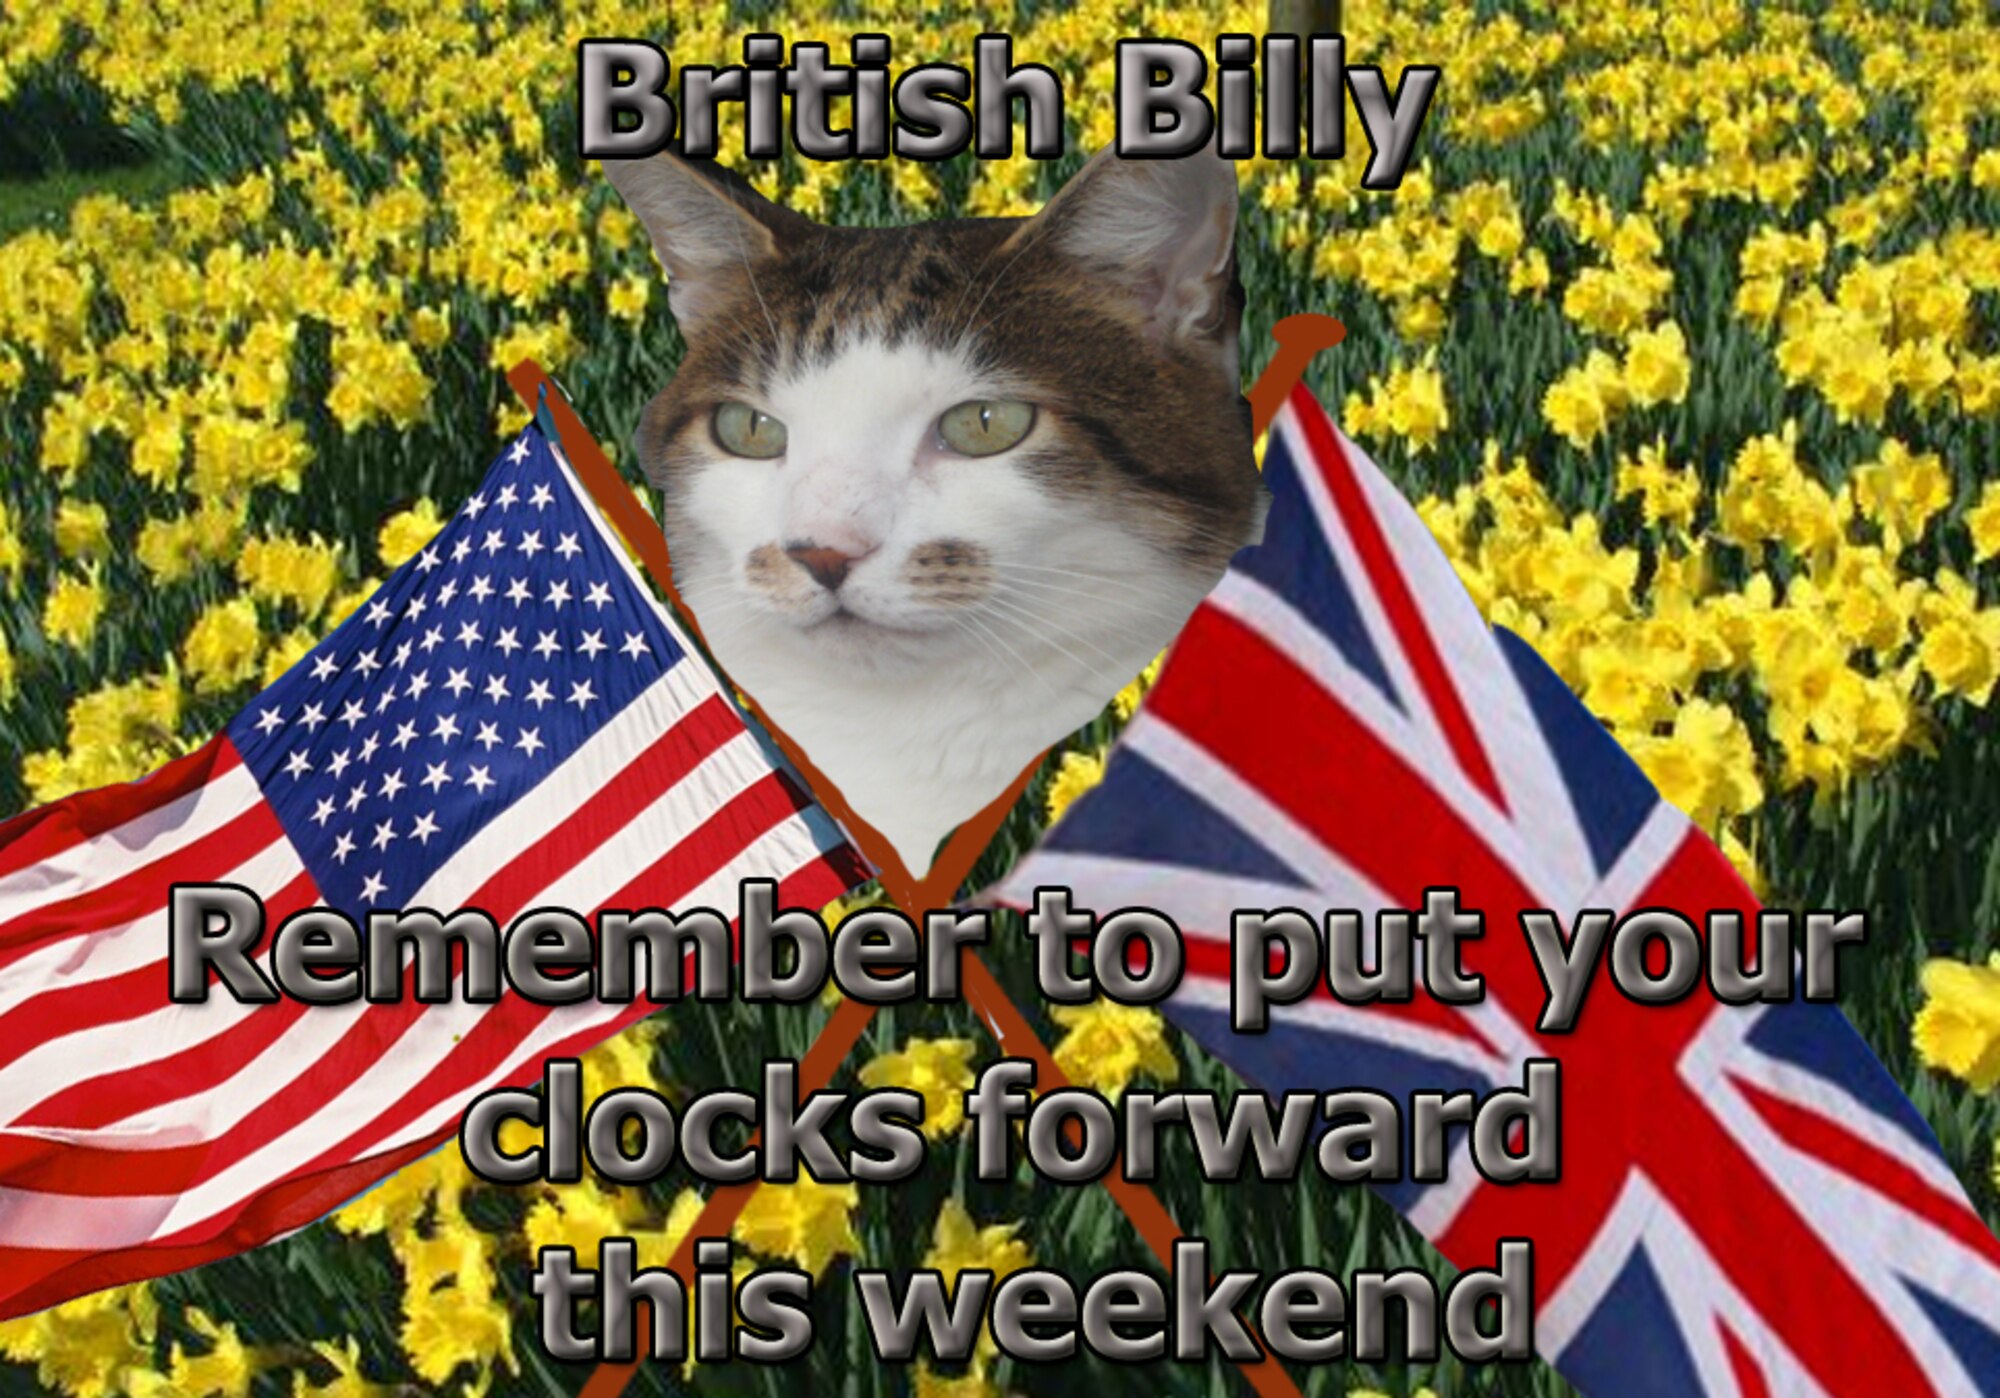 In all the excitement, don’t forget to set your clocks forward by one hour March 25, officially the start of British Summer Time. We may be losing an hour, but with extra daylight in the evenings and a long summer ahead, there’s plenty to look forward to after the clocks change. Ask Billy about the things puzzling about about life and culture in the U.K., and if he doesn’t know the answer, he has ways and means of finding out. Feel free to send him any questions, and when he isn’t sleeping or hunting, he’ll try and put a few thoughts together to help you out.